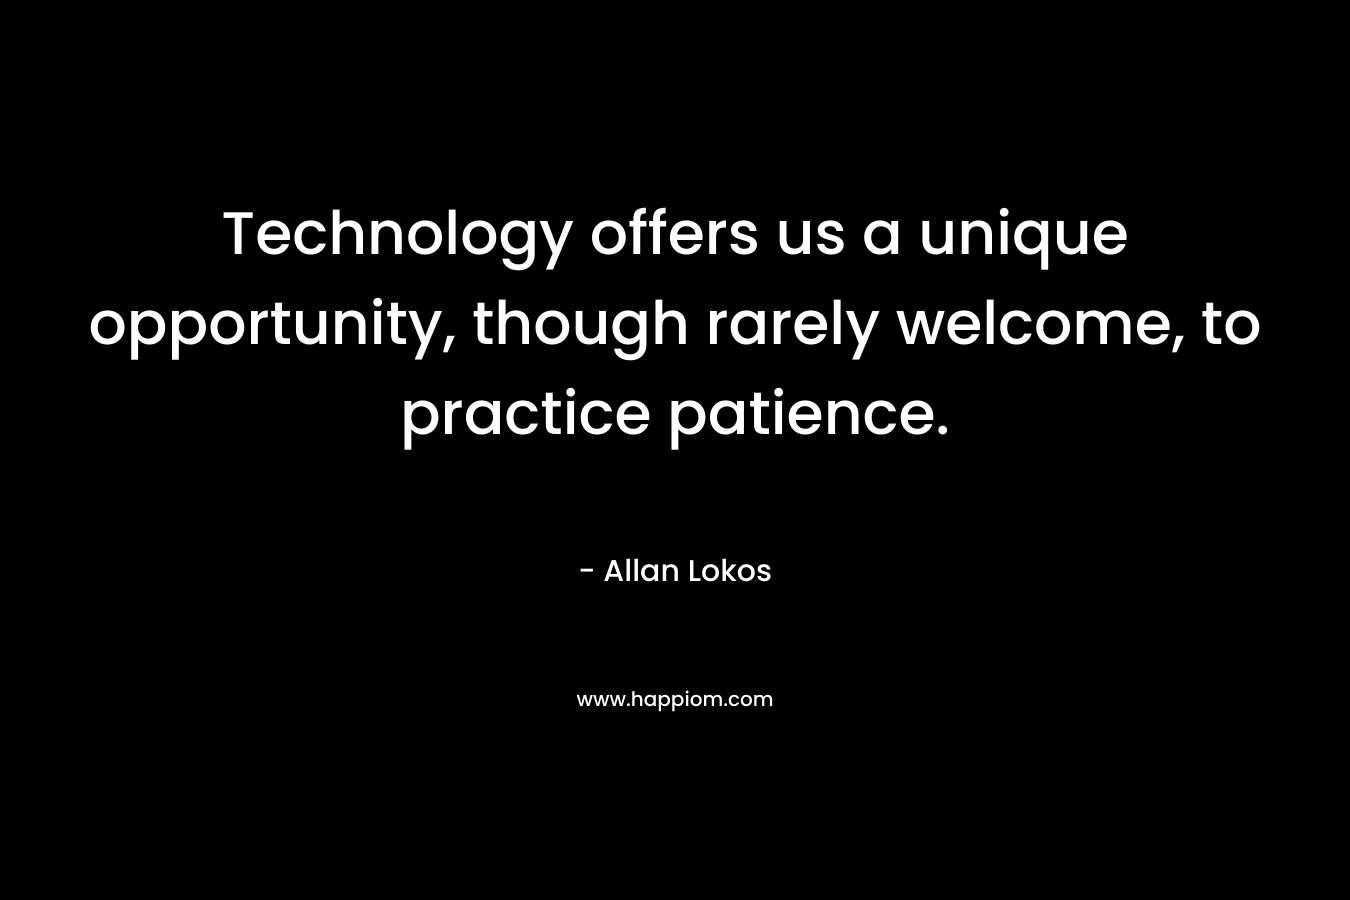 Technology offers us a unique opportunity, though rarely welcome, to practice patience. – Allan Lokos